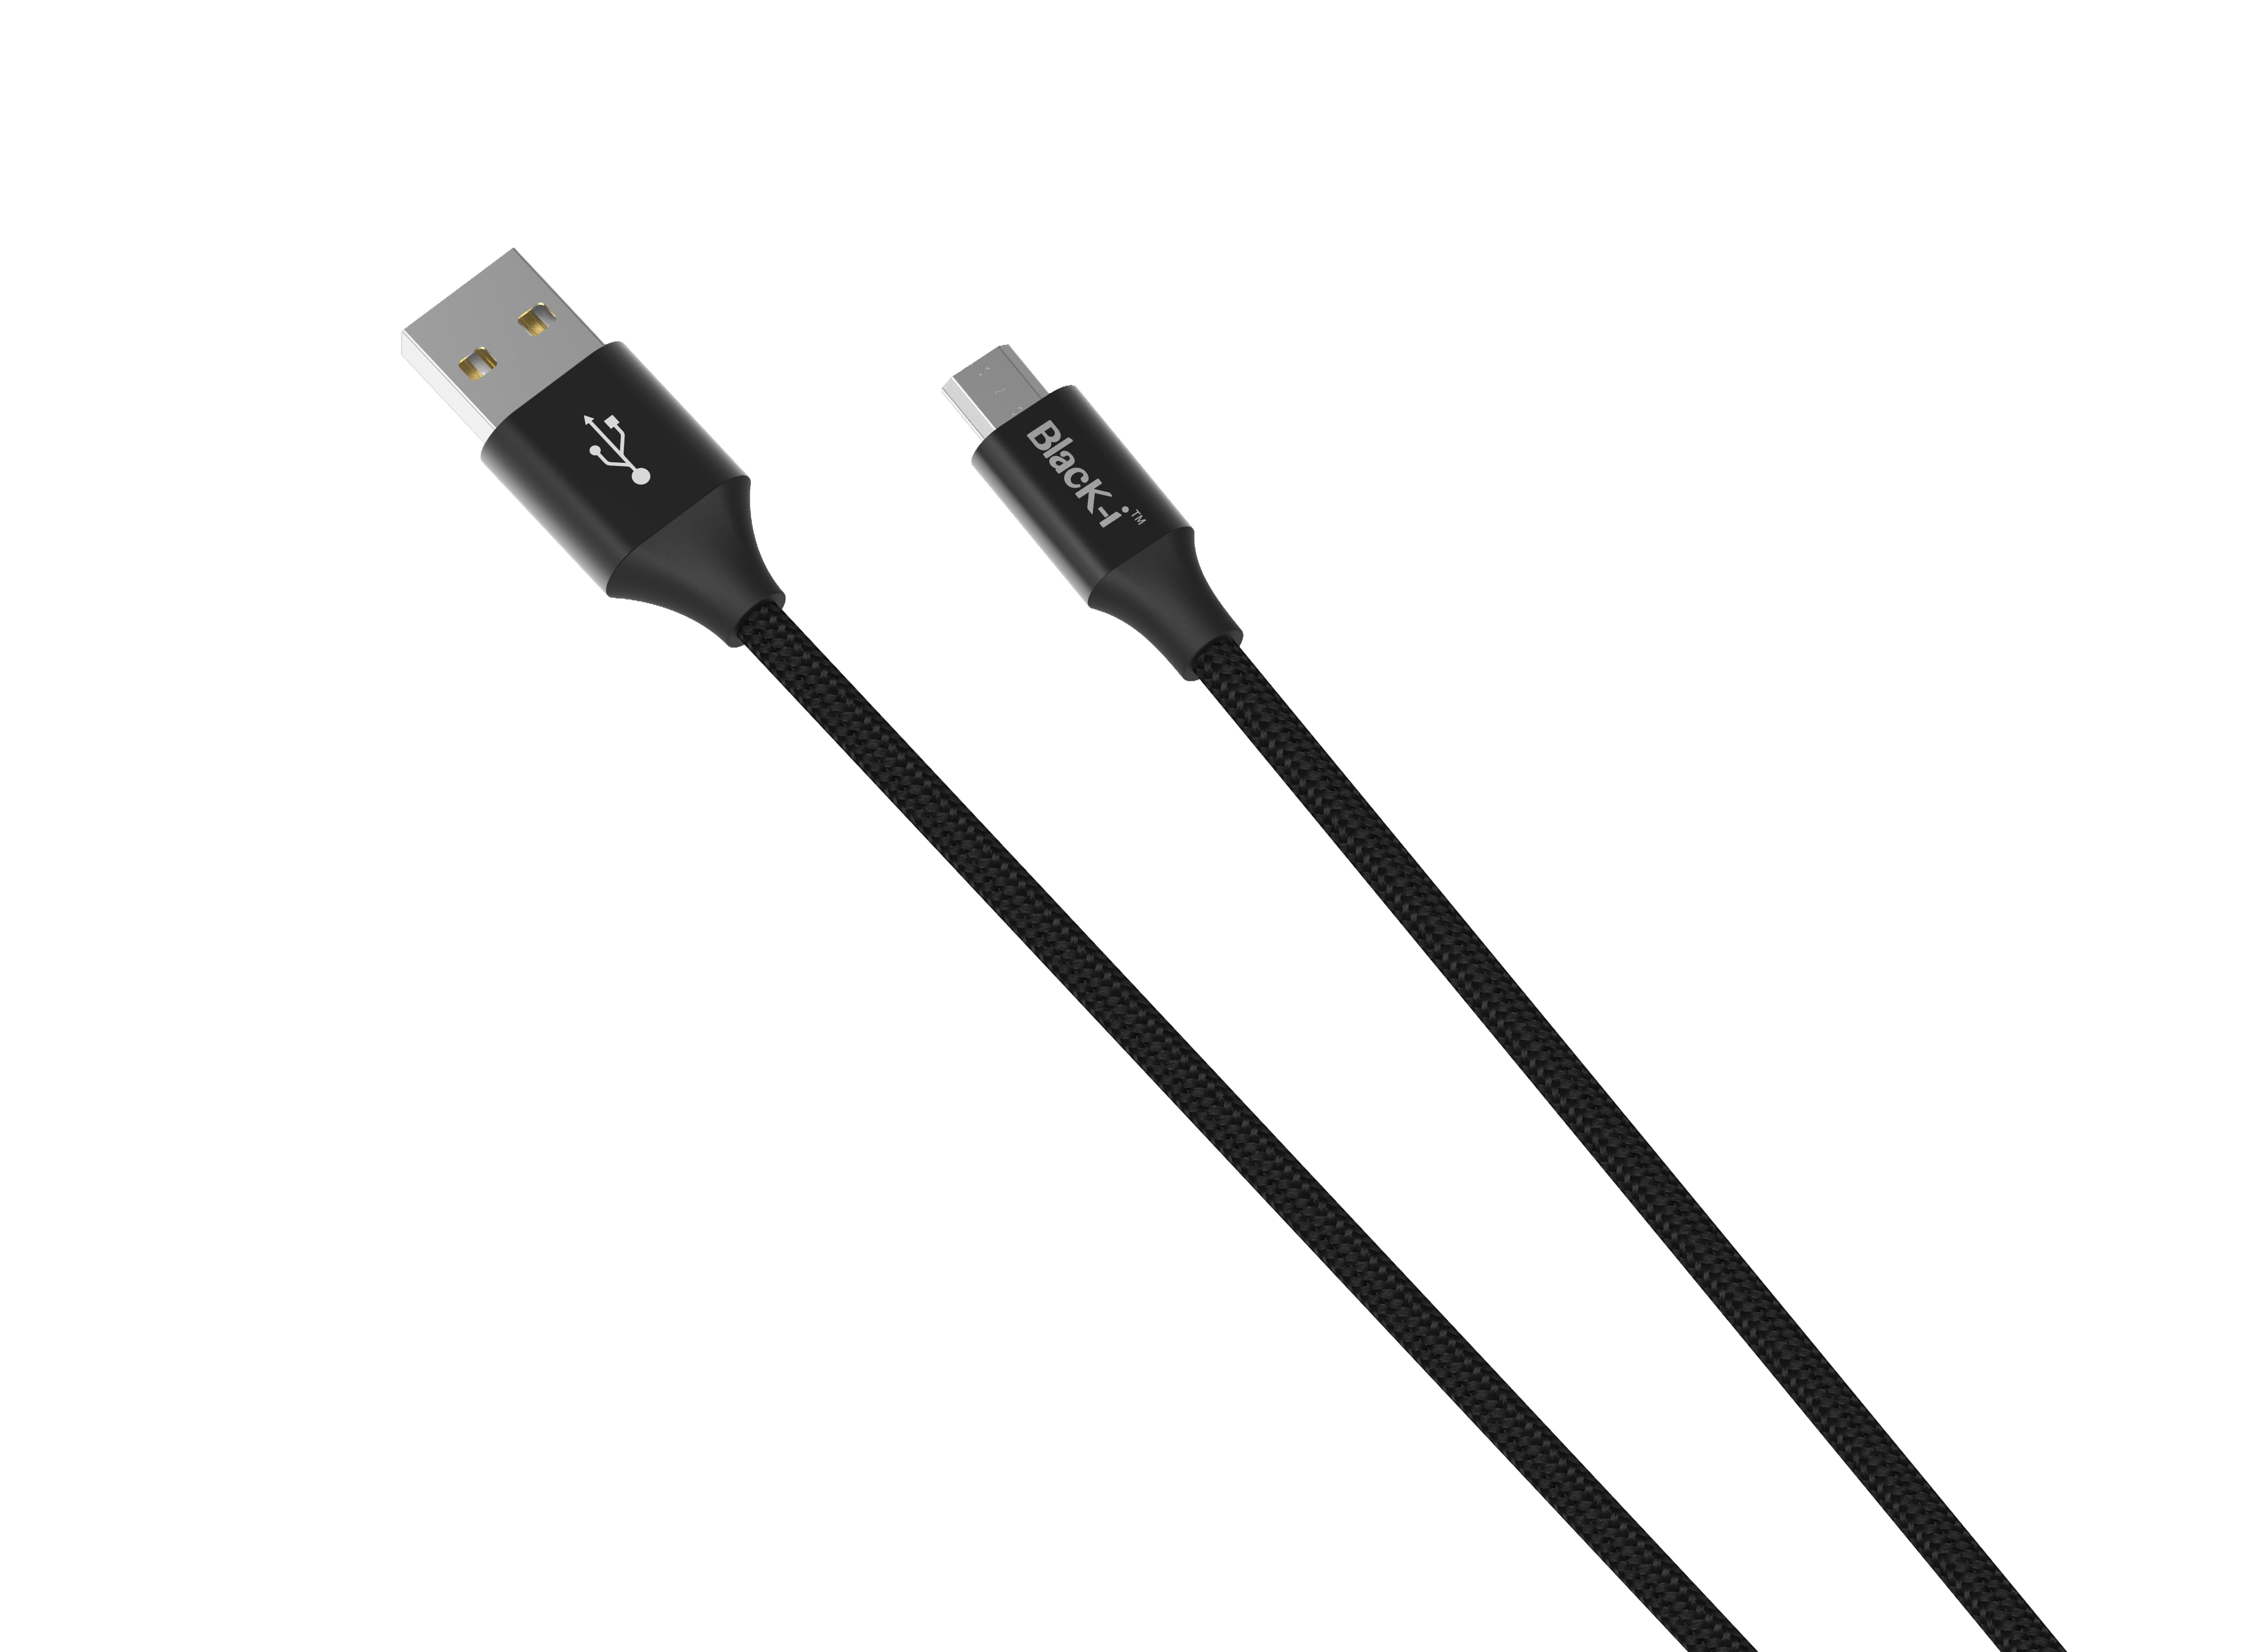 Black-i USB 2.0 to Micro Cable - 2 Meter Length – Efficient Connectivity for Seamless Data Transfer and Device Charging